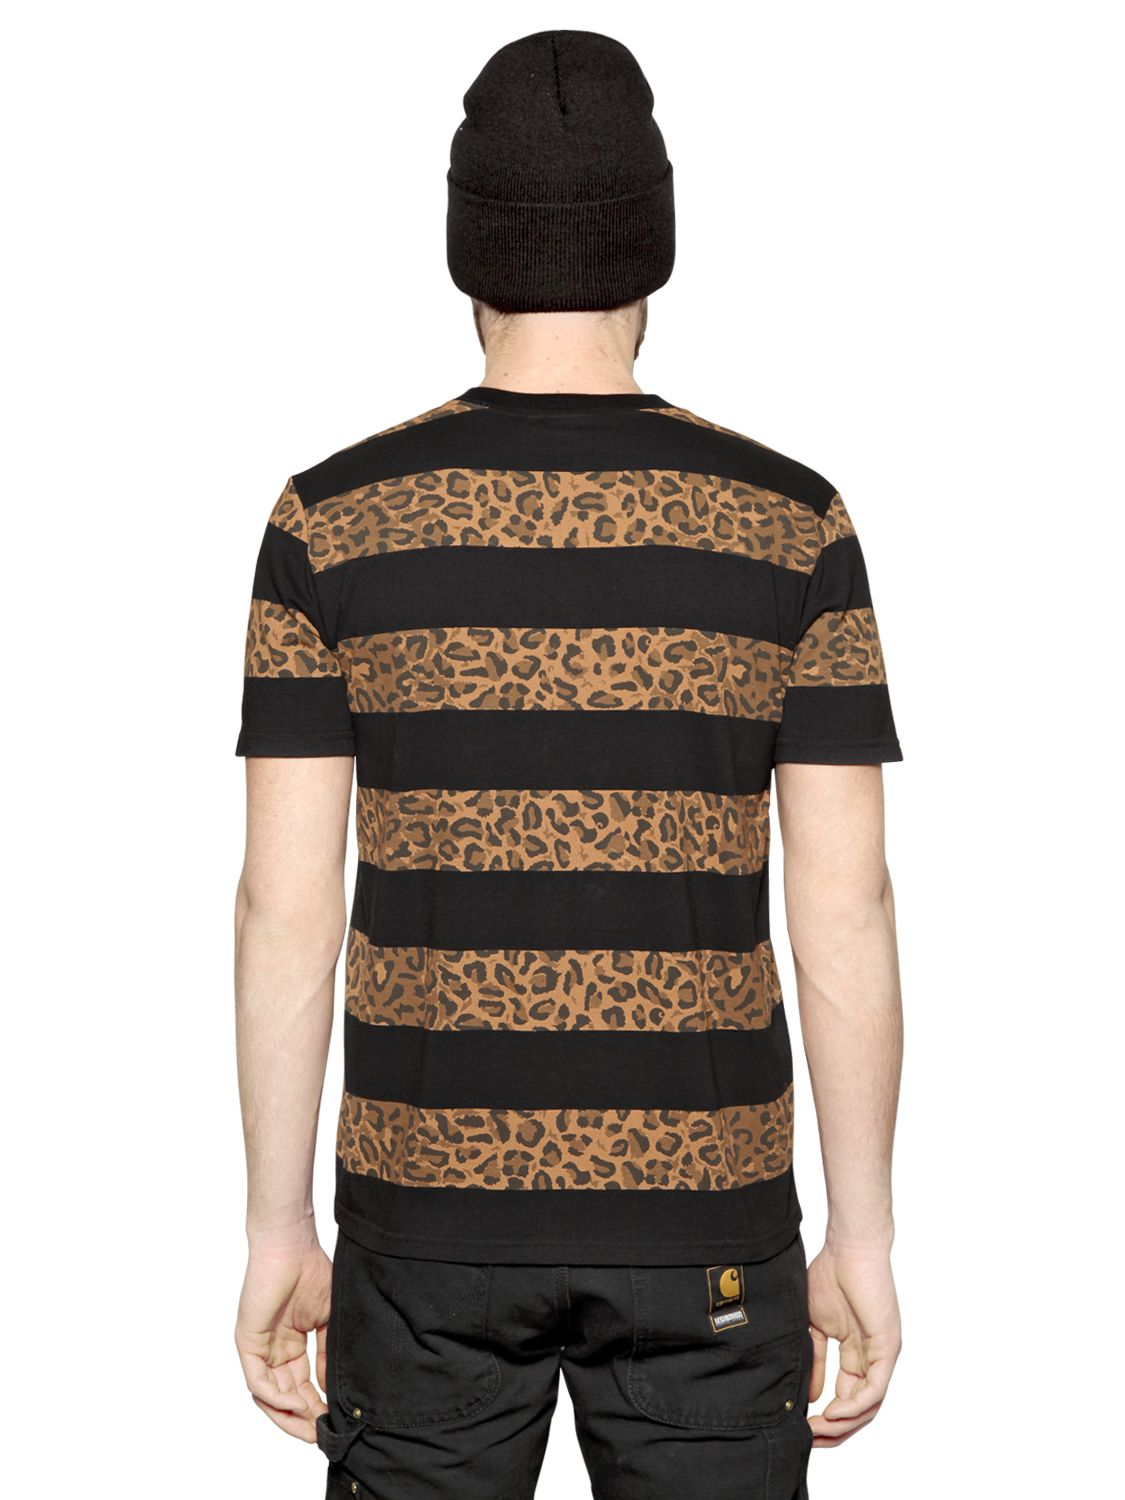 Lyst - Carhartt Striped Leopard Printed Cotton T-Shirt in Black for Men